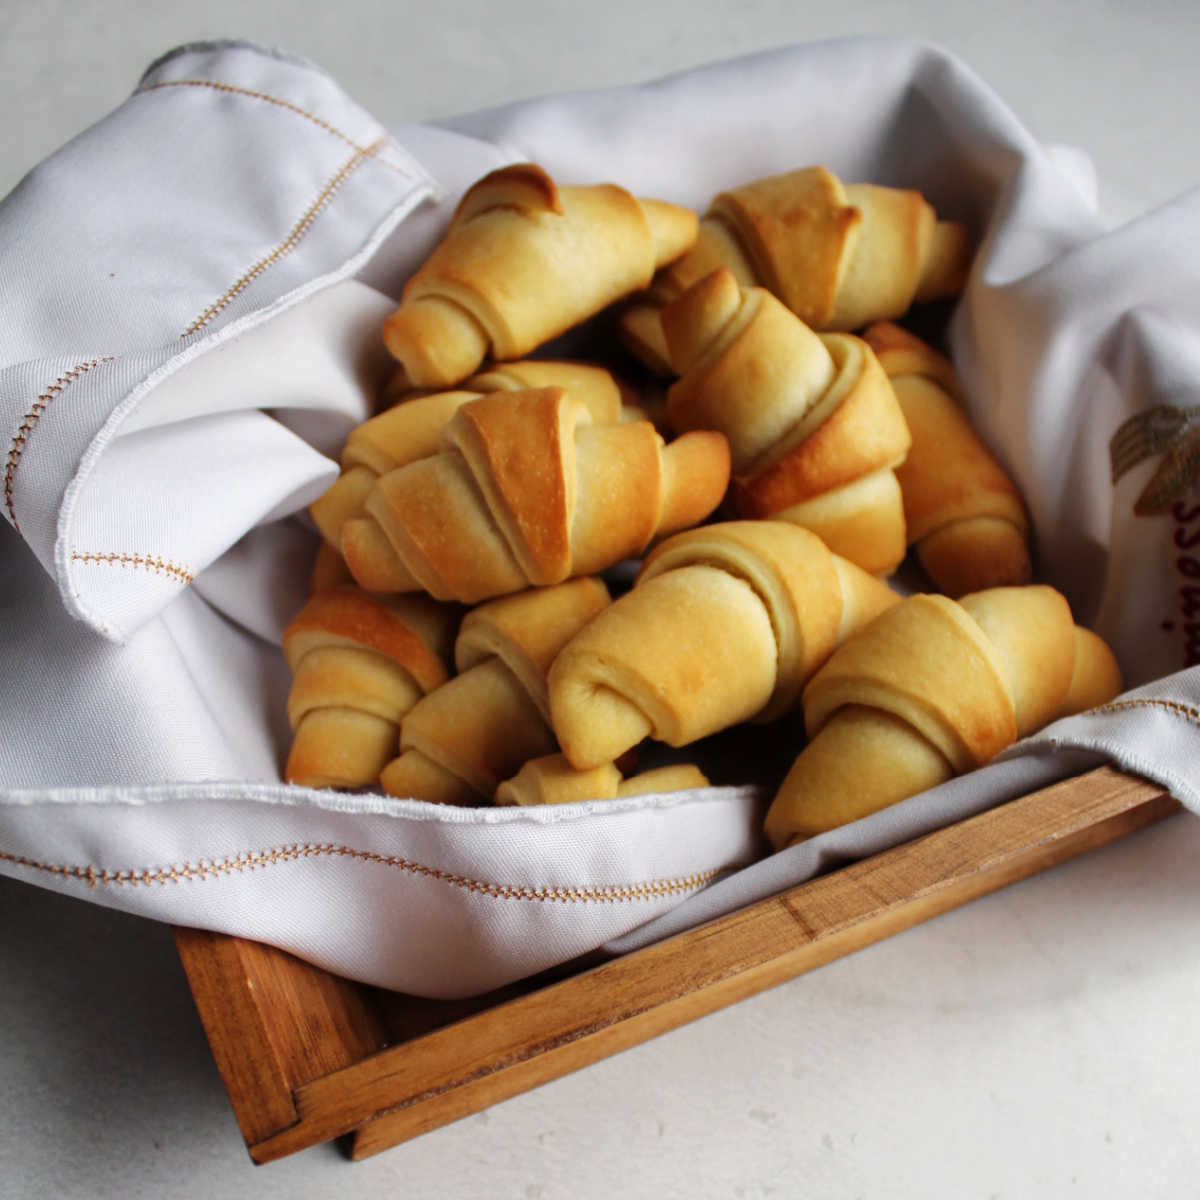 Basket of fresh homemade crescent rolls with buttery golden brown exterior and classic horn shape. 